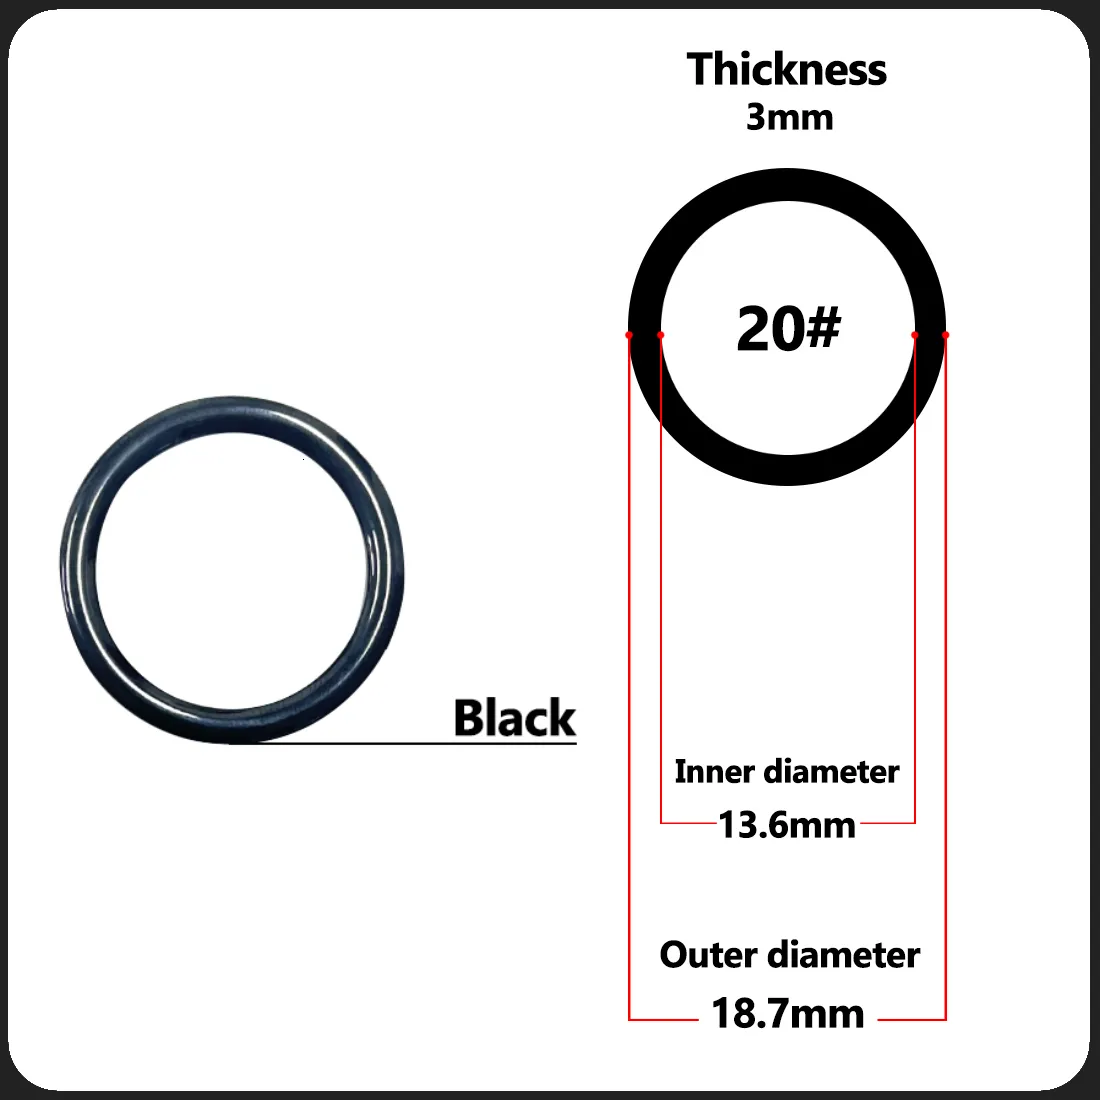 Boat Fishing Rods Rod Guides Ring Wear Resistant Ceramic Guide Repair  Replacement Kit Alconite Black 6mm47m 230729 From Xuan09, $11.34